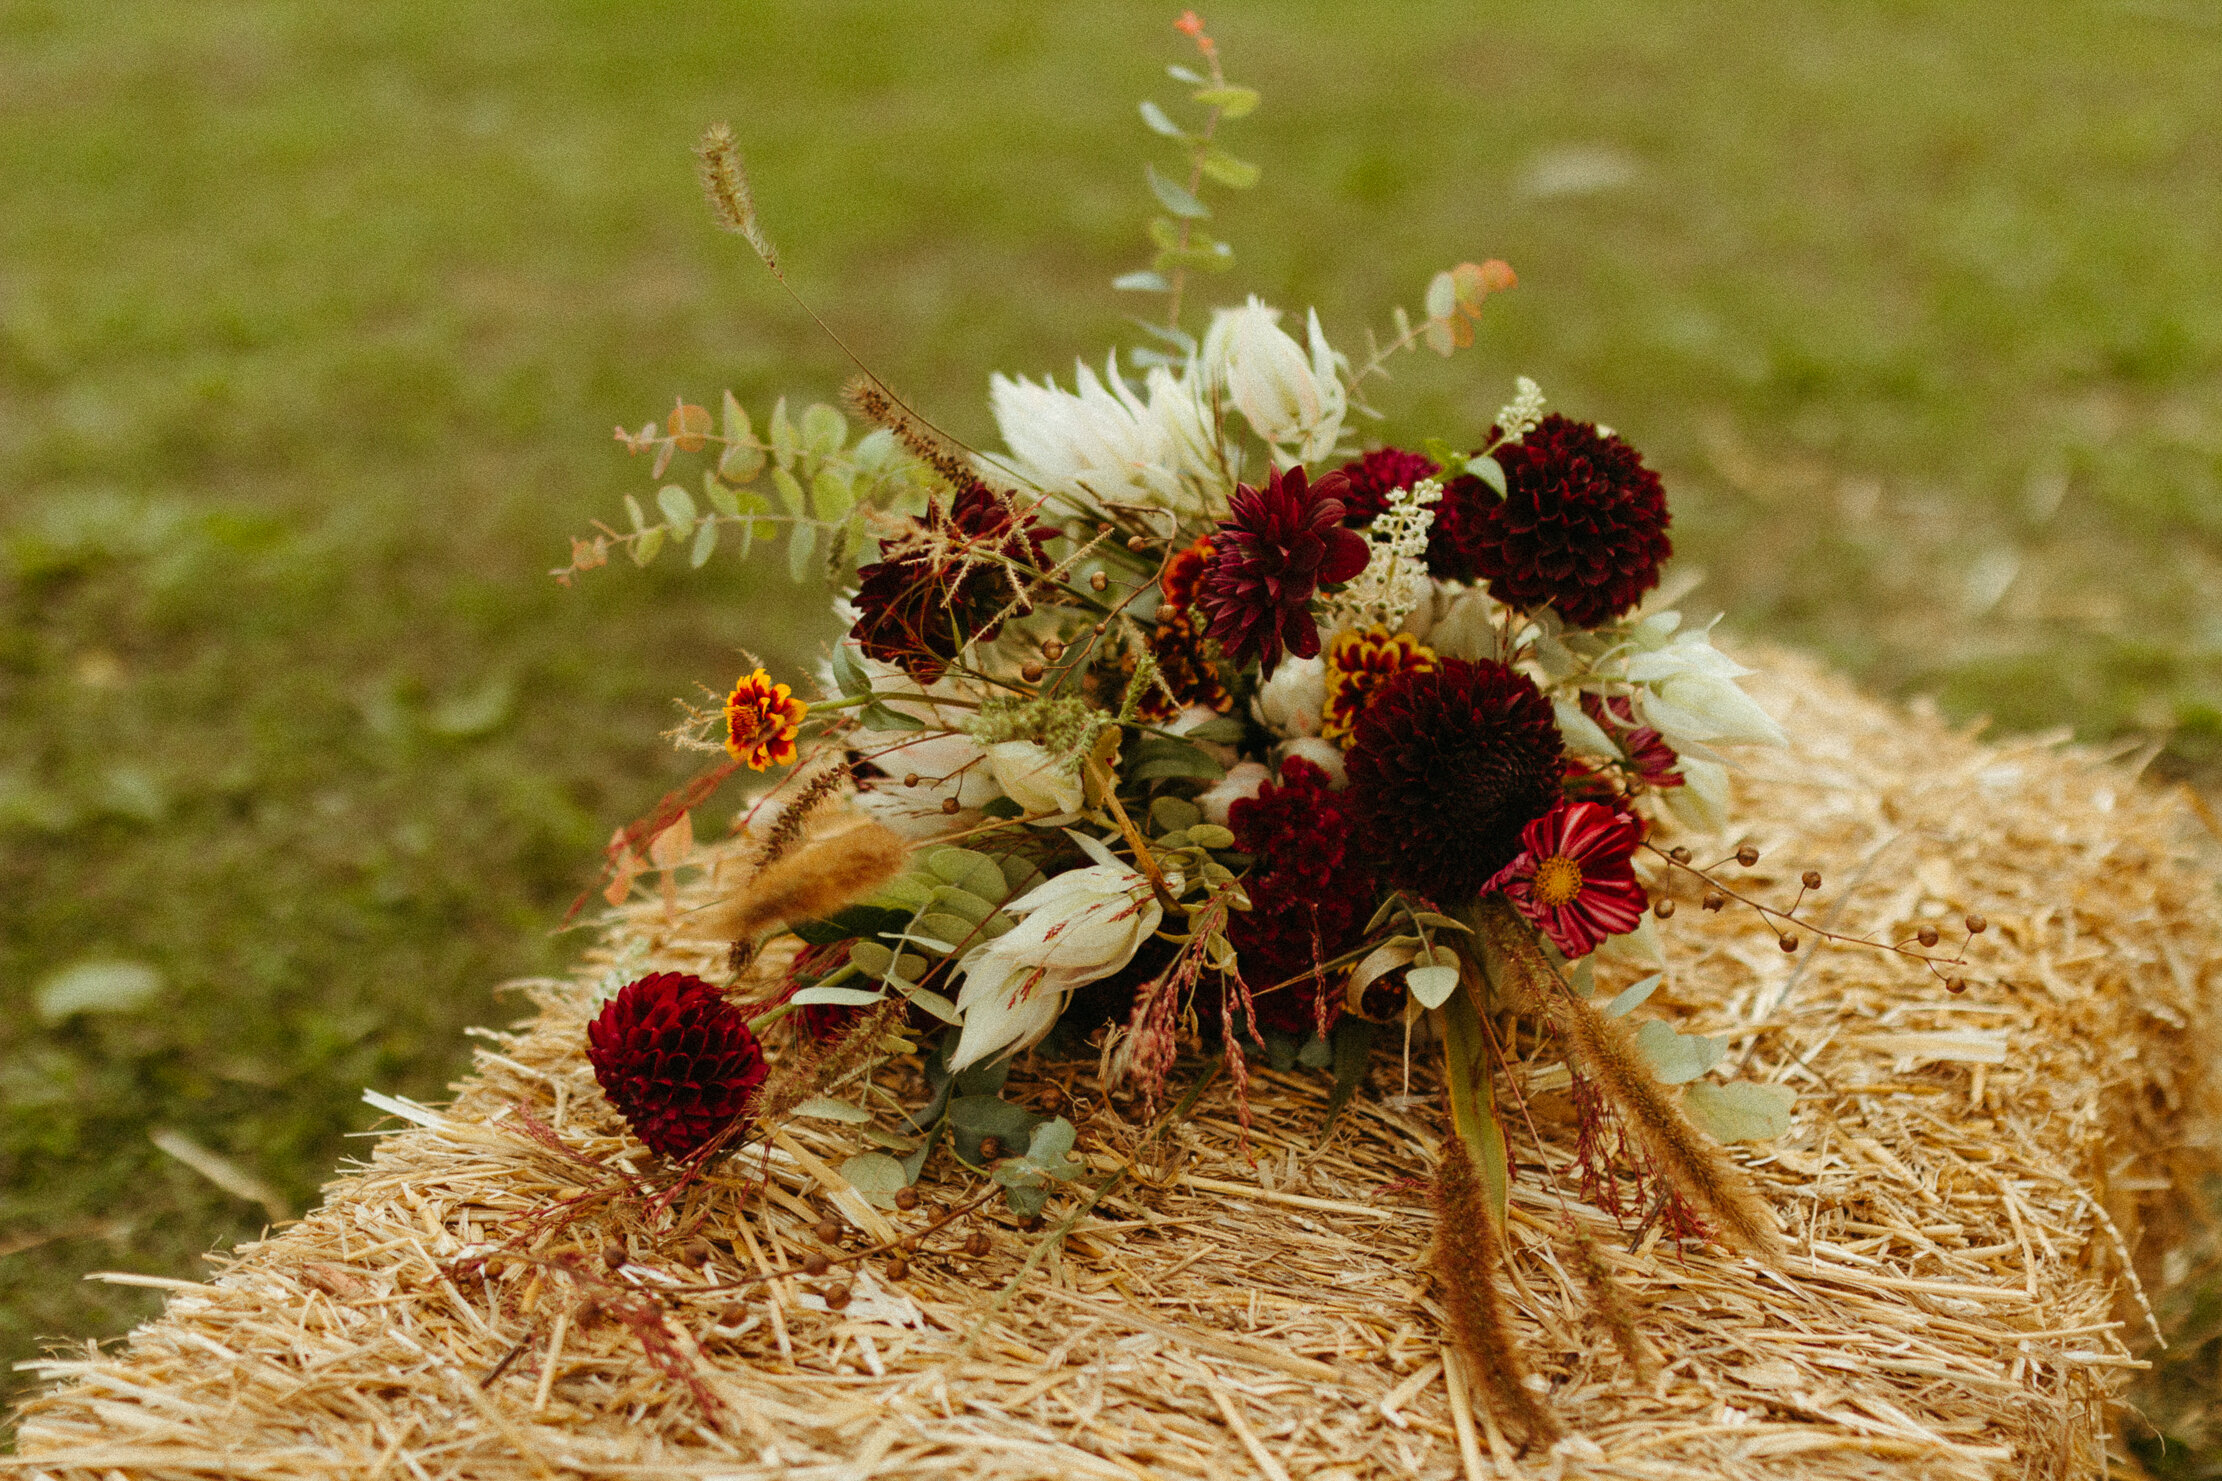 Rustic Upstate New York Fresh Flowers Bohemian Autumn Equinox Wedding Fall Floral Bouquet by Intimate Seattle Wedding Photographer Halle Roland Photography — Seattle Elopement Photographer 